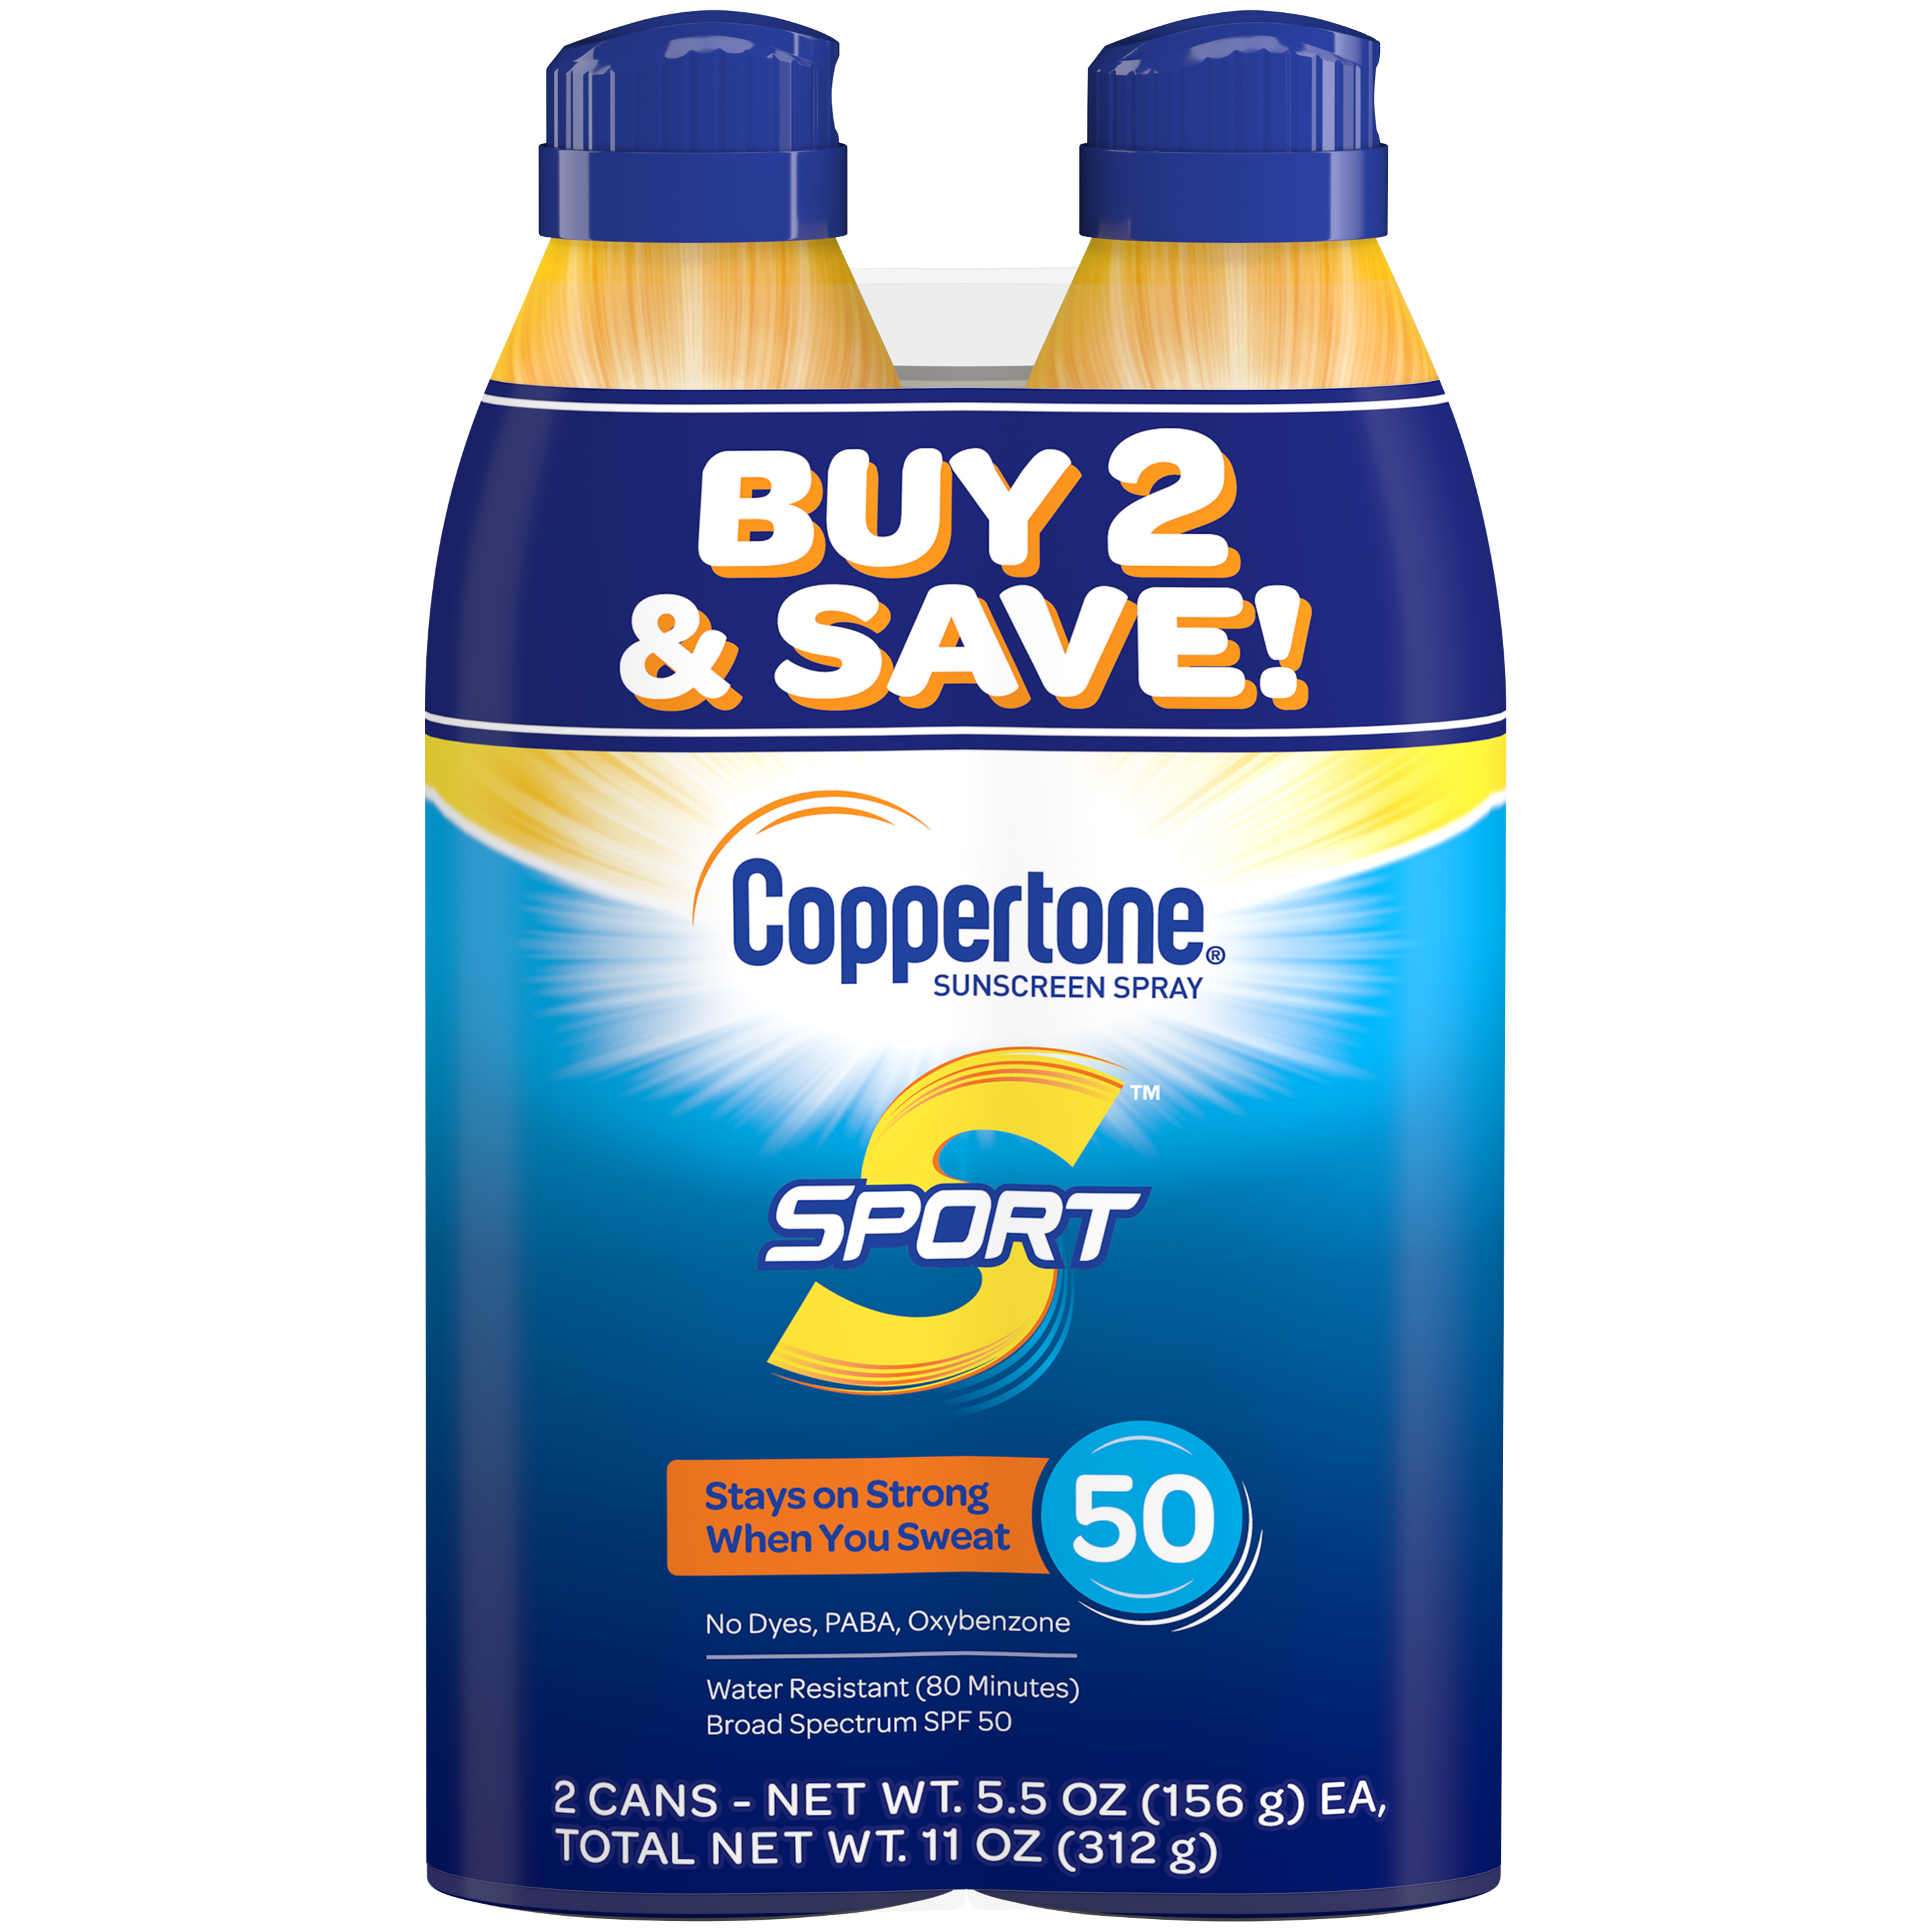 Coppertone Sport Sunscreen Spray SPF 50, Twin Pack (5.5 oz. Each) - image 1 of 8